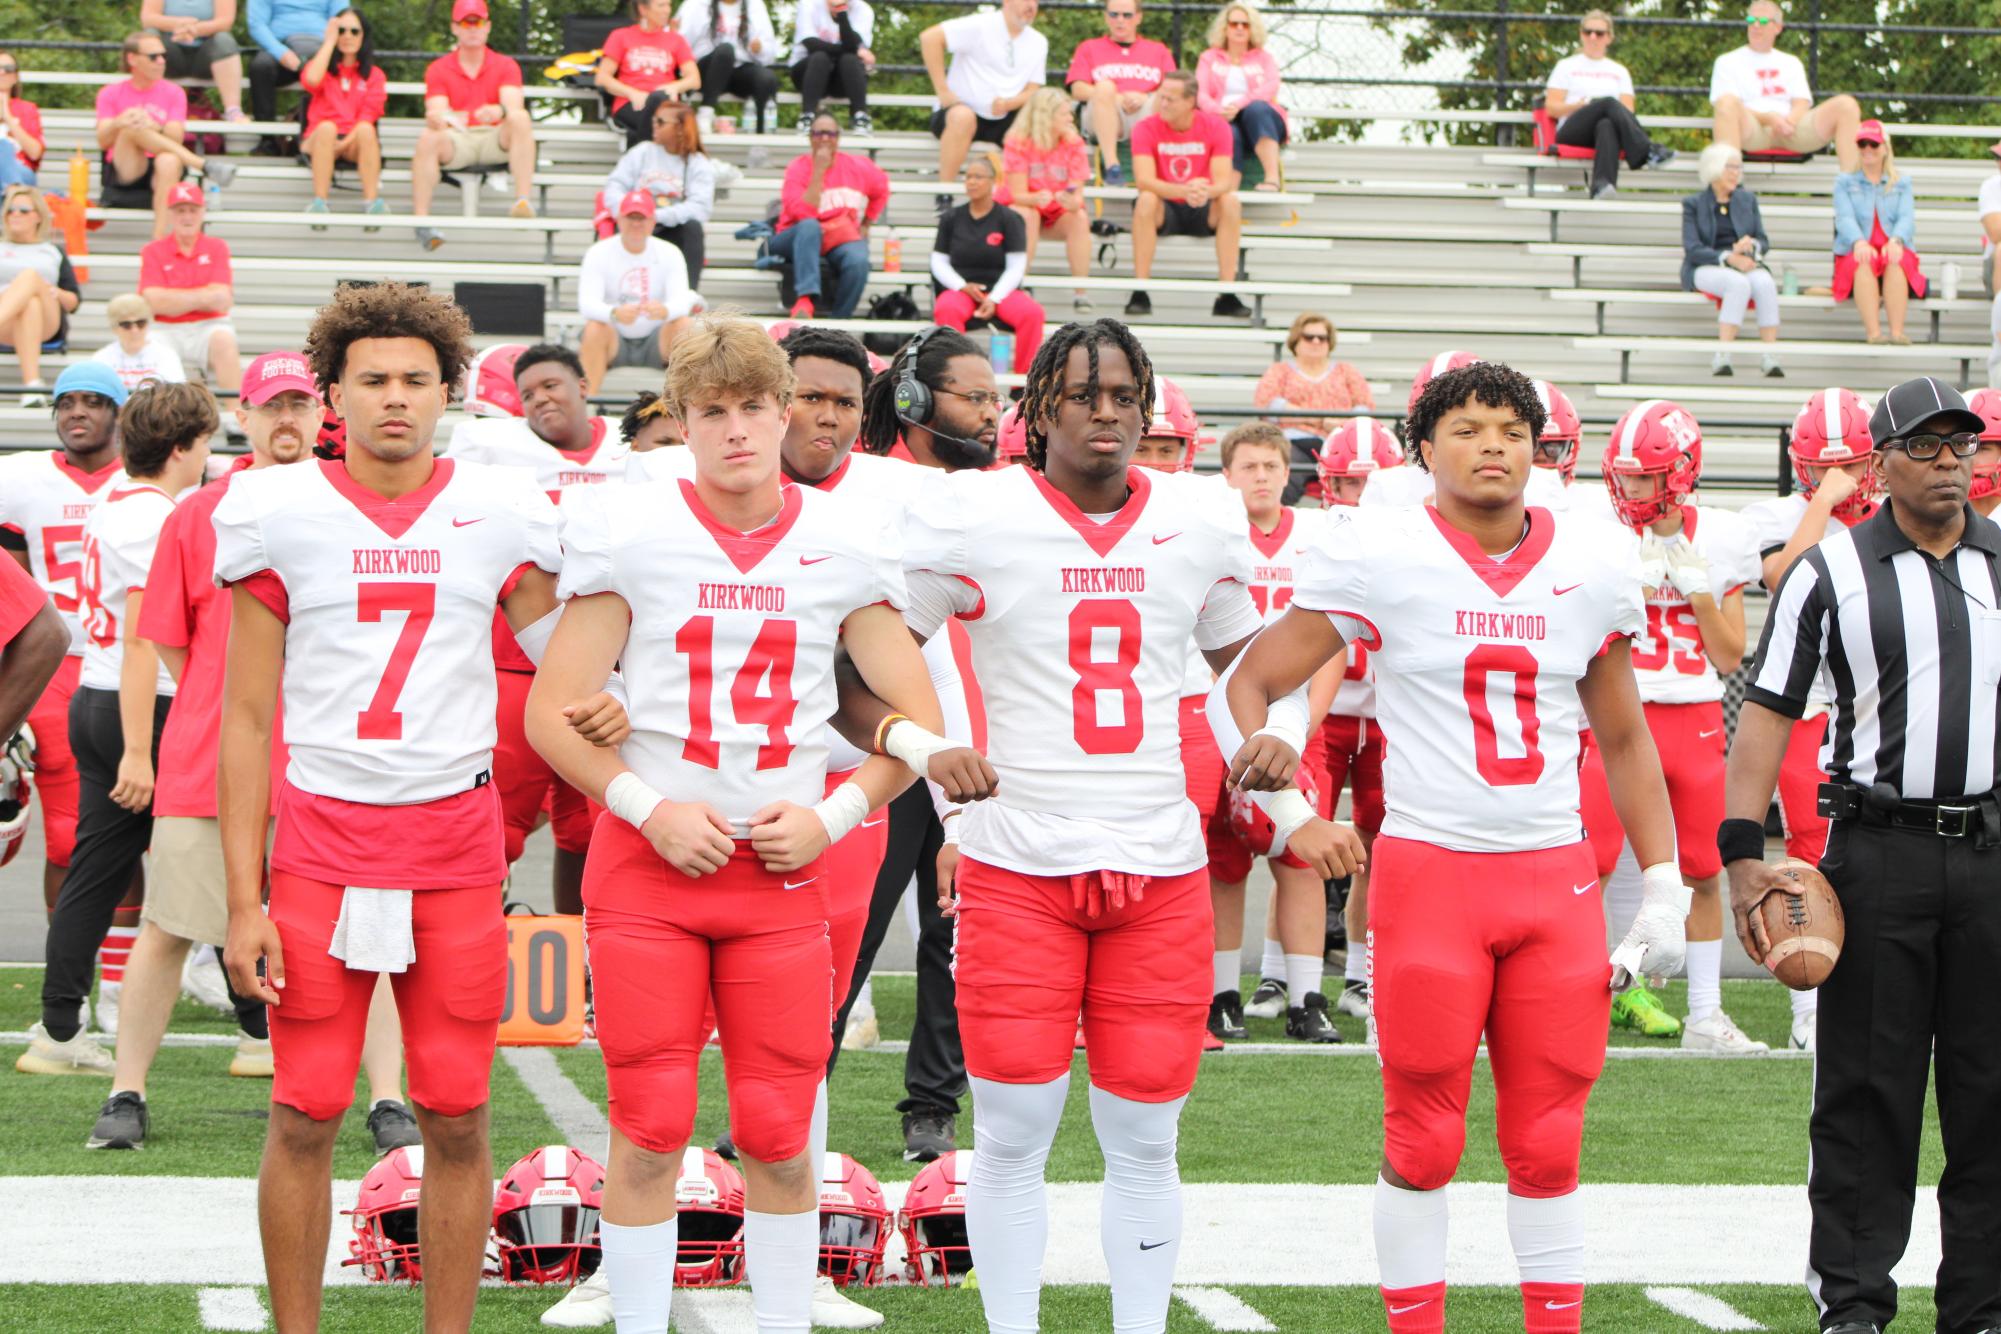 Senior football players stand as captains before their game.